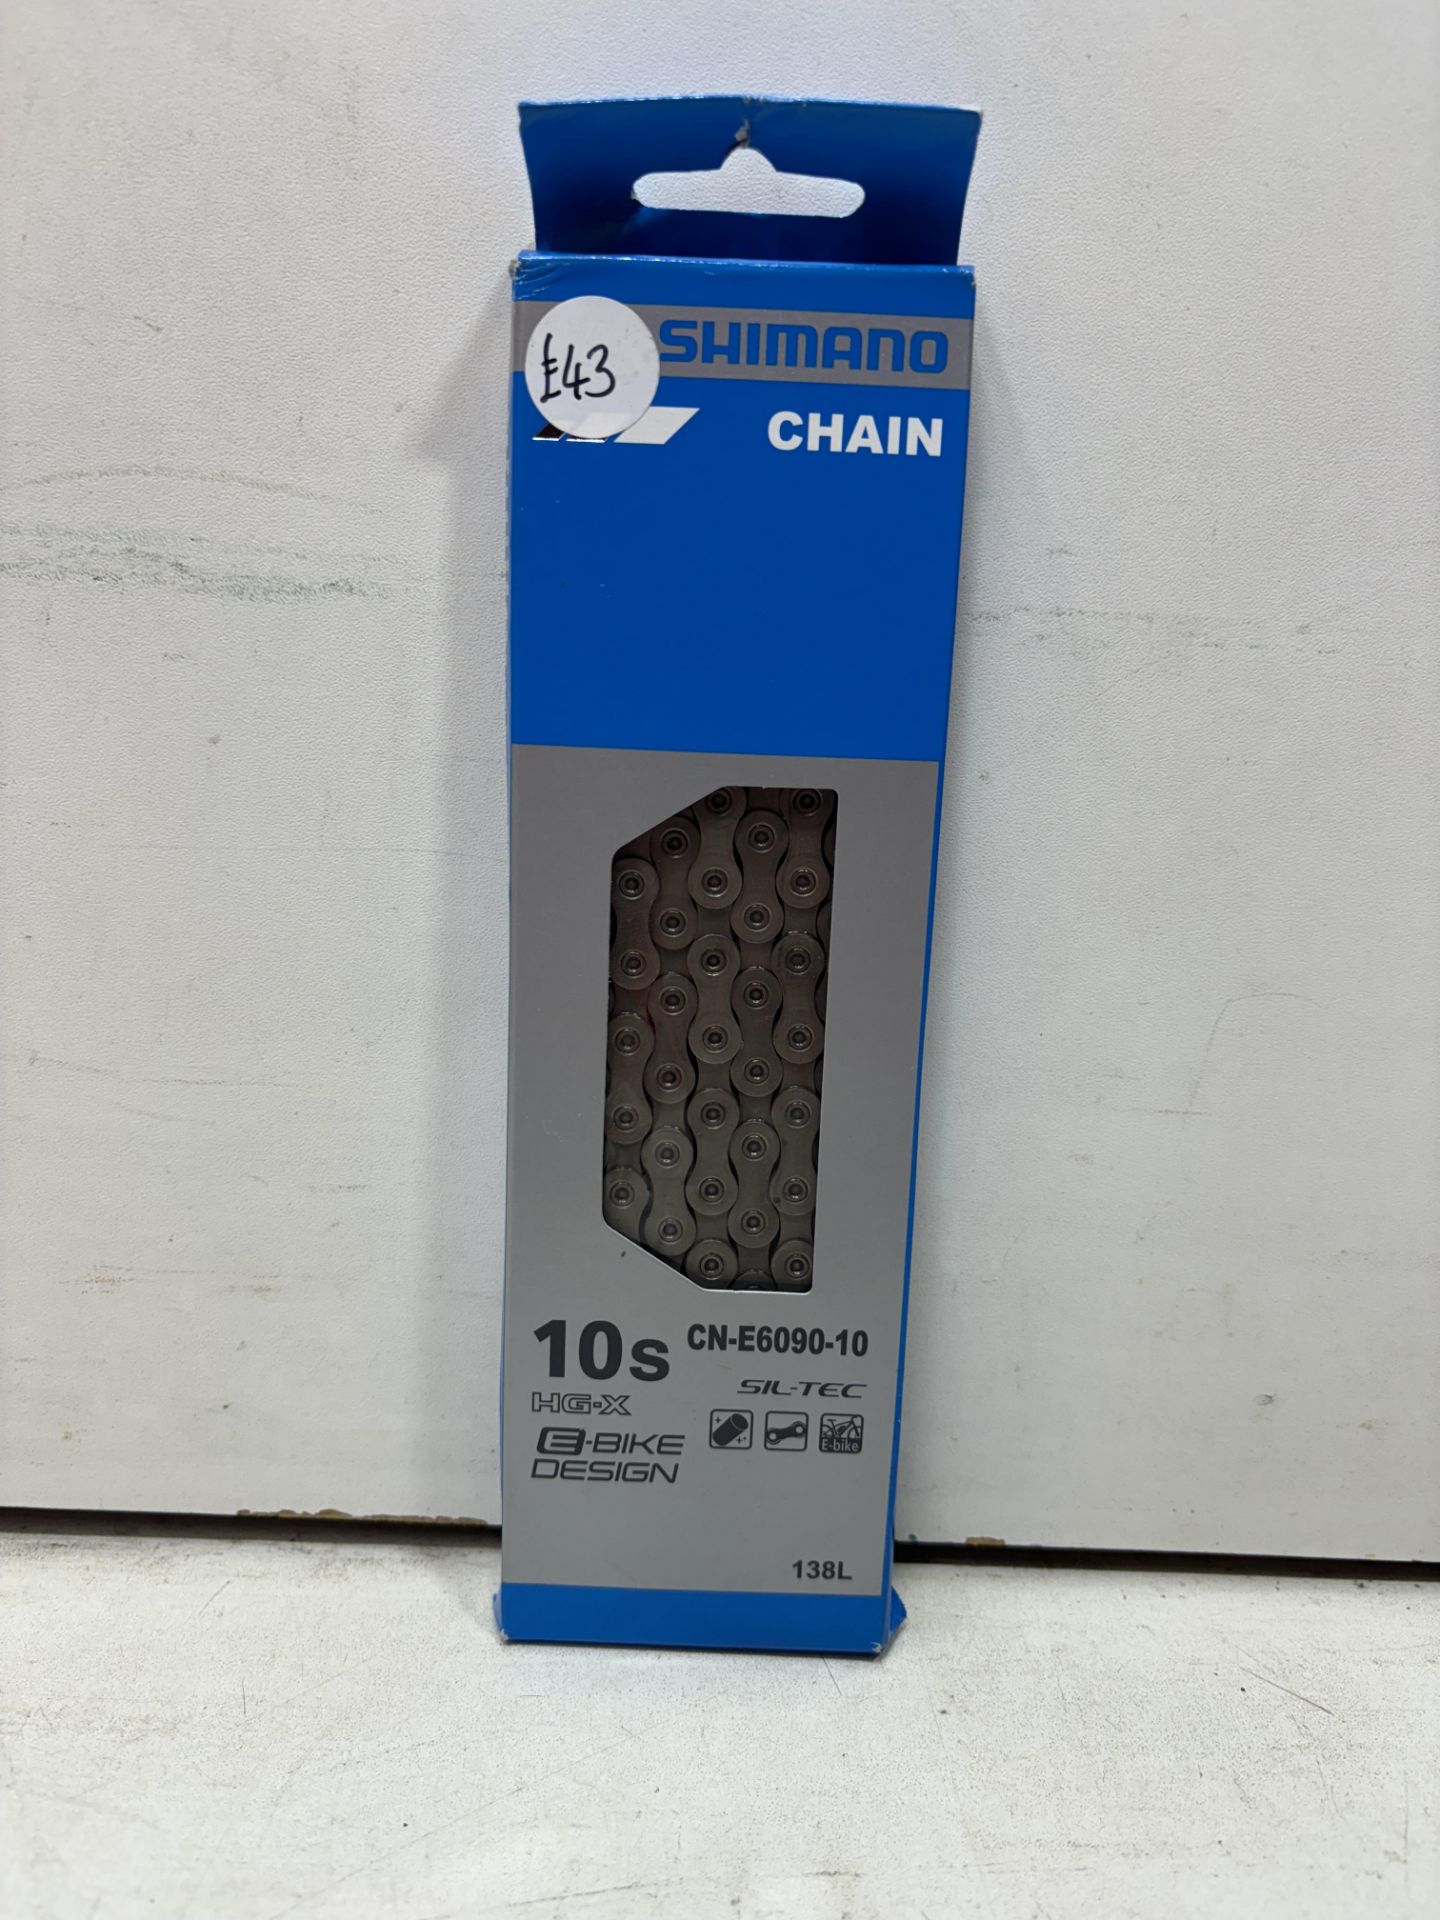 4 X Shimano CN-E6090-10 E-Bicycle 10-Speed Chains - Image 2 of 2